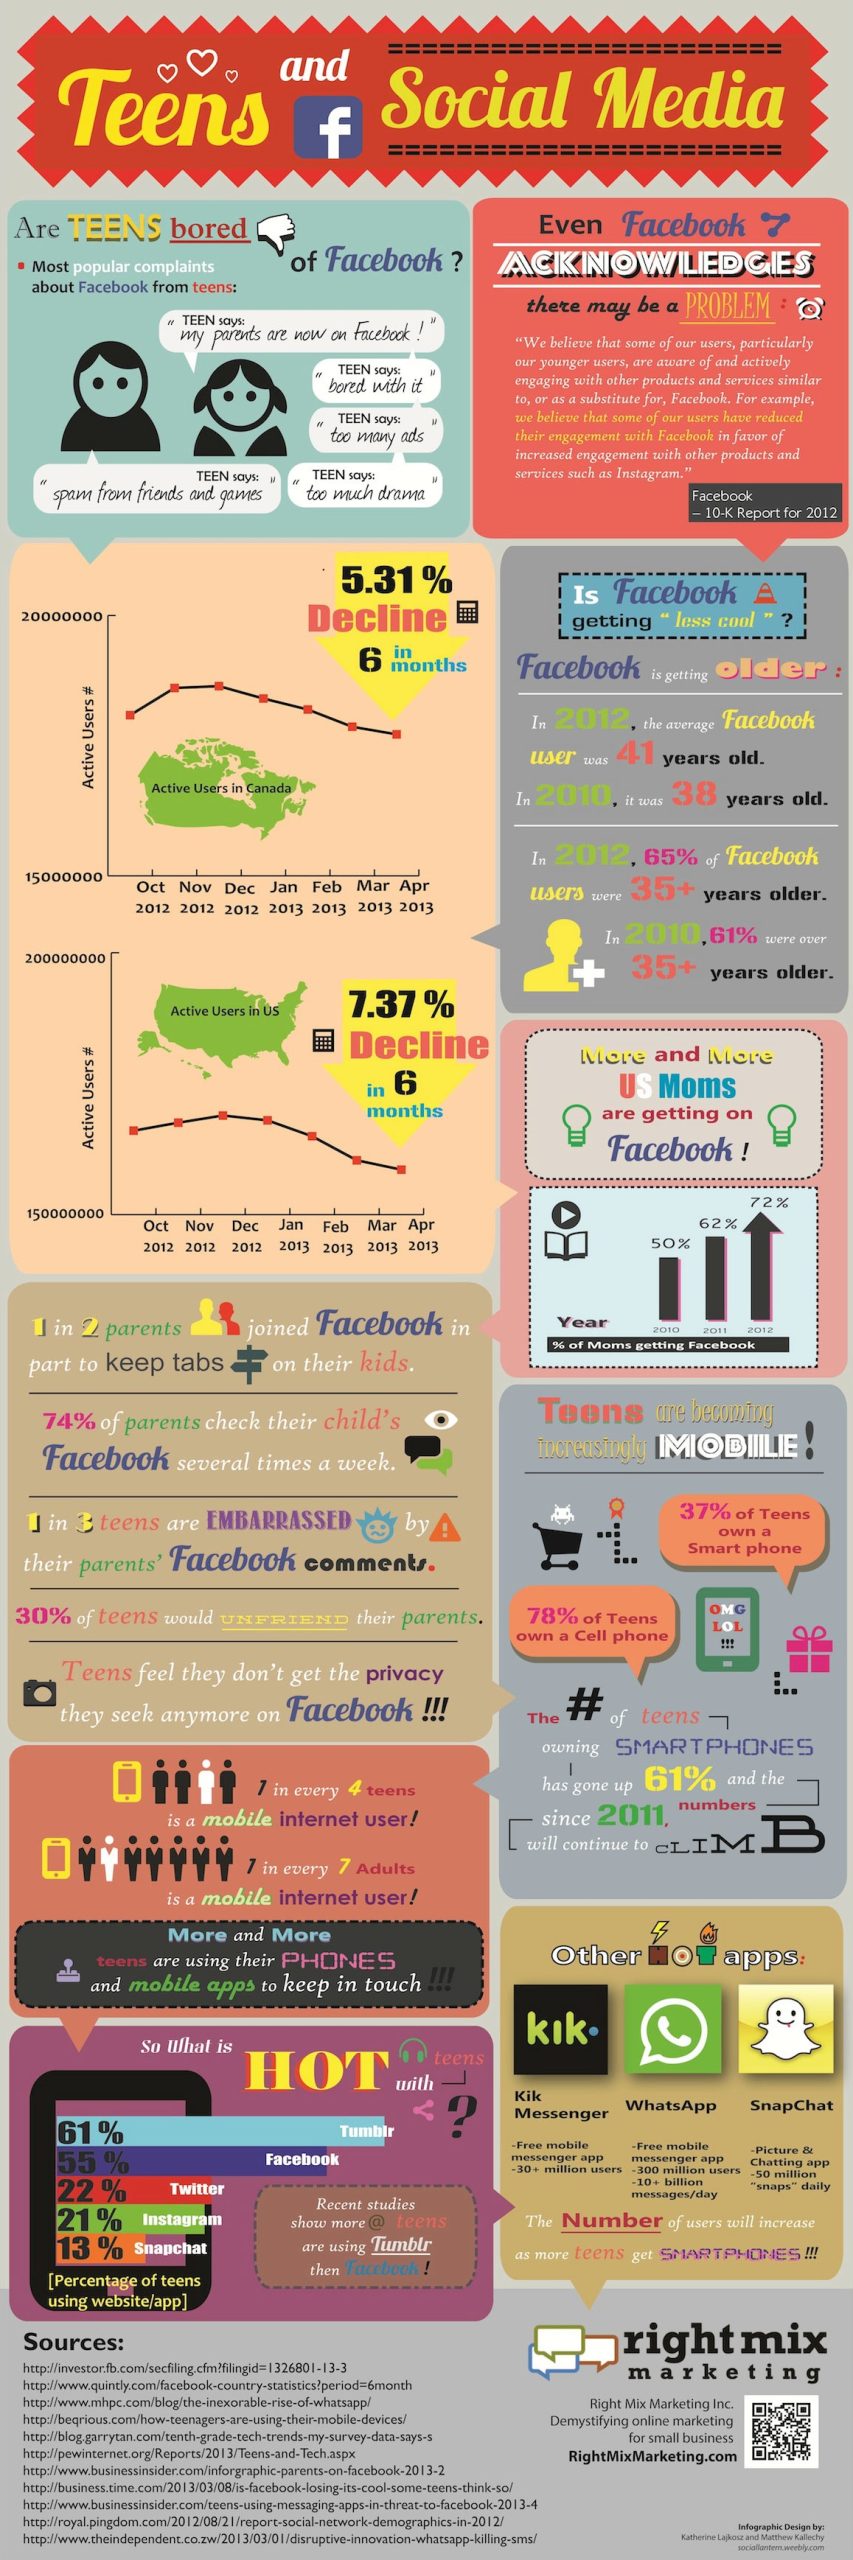 Teens and Social Media Infographic